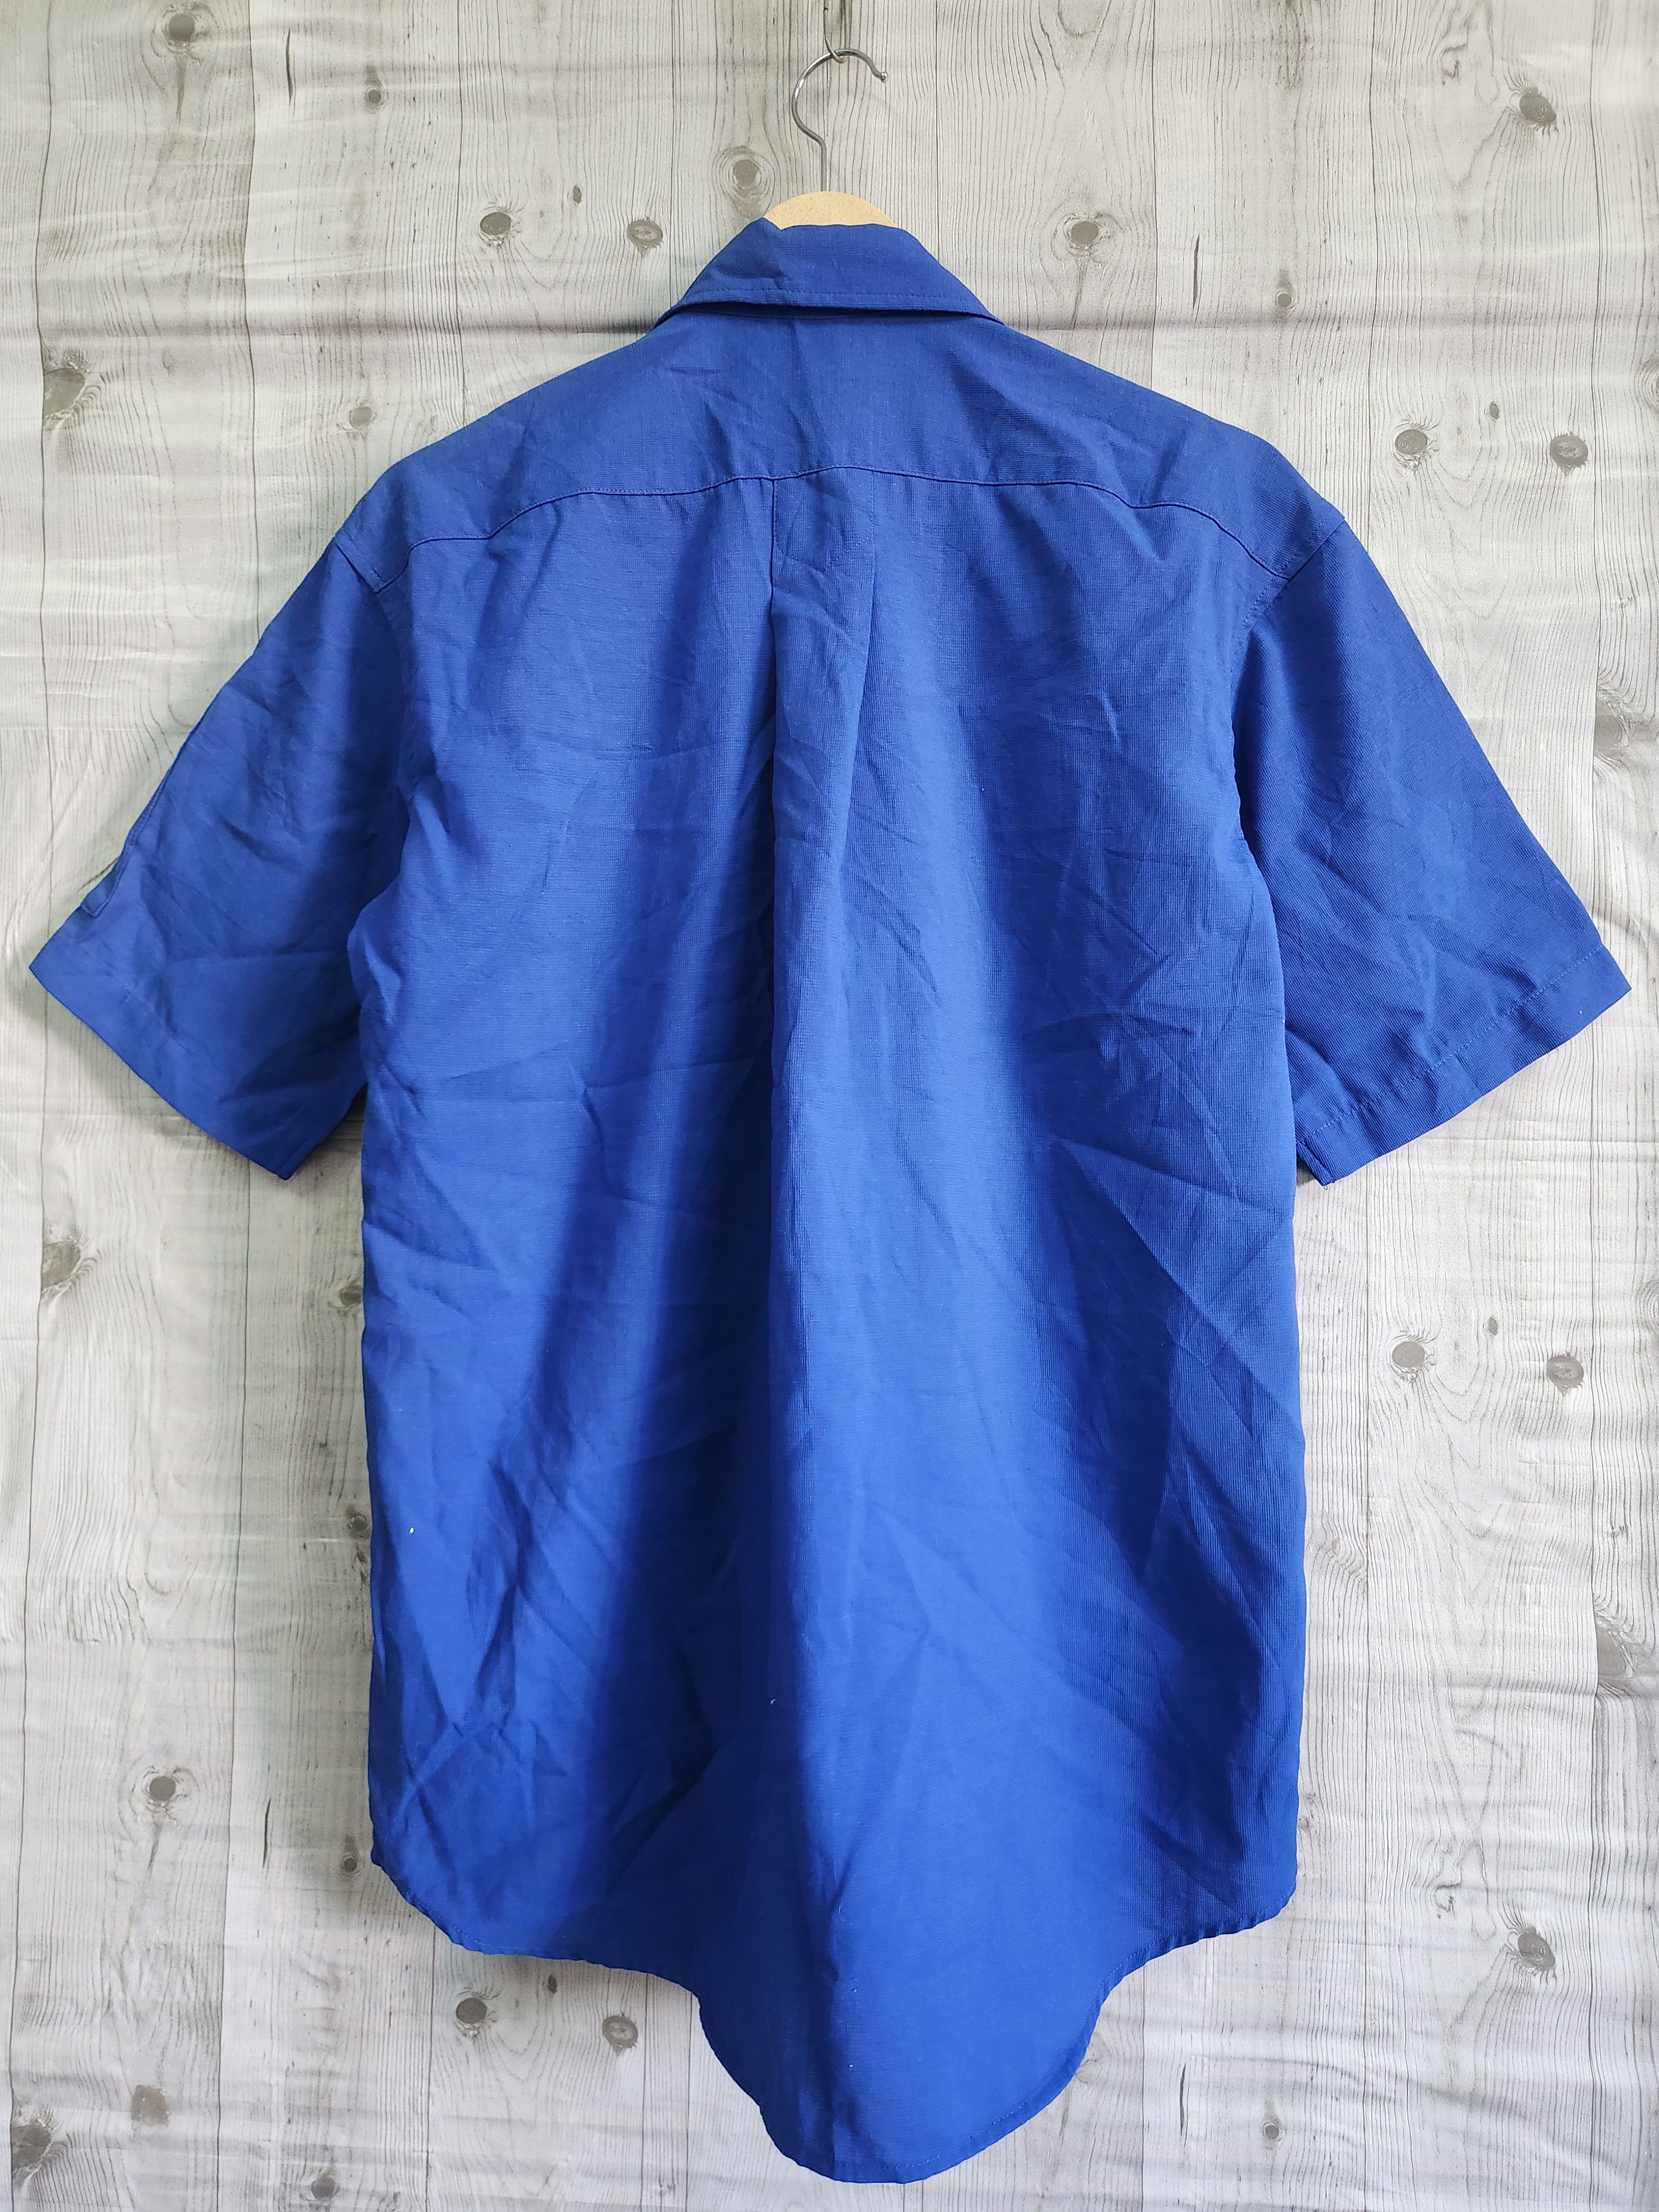 Vintage Japan ENEOS Workers Outlet Shirts - 16